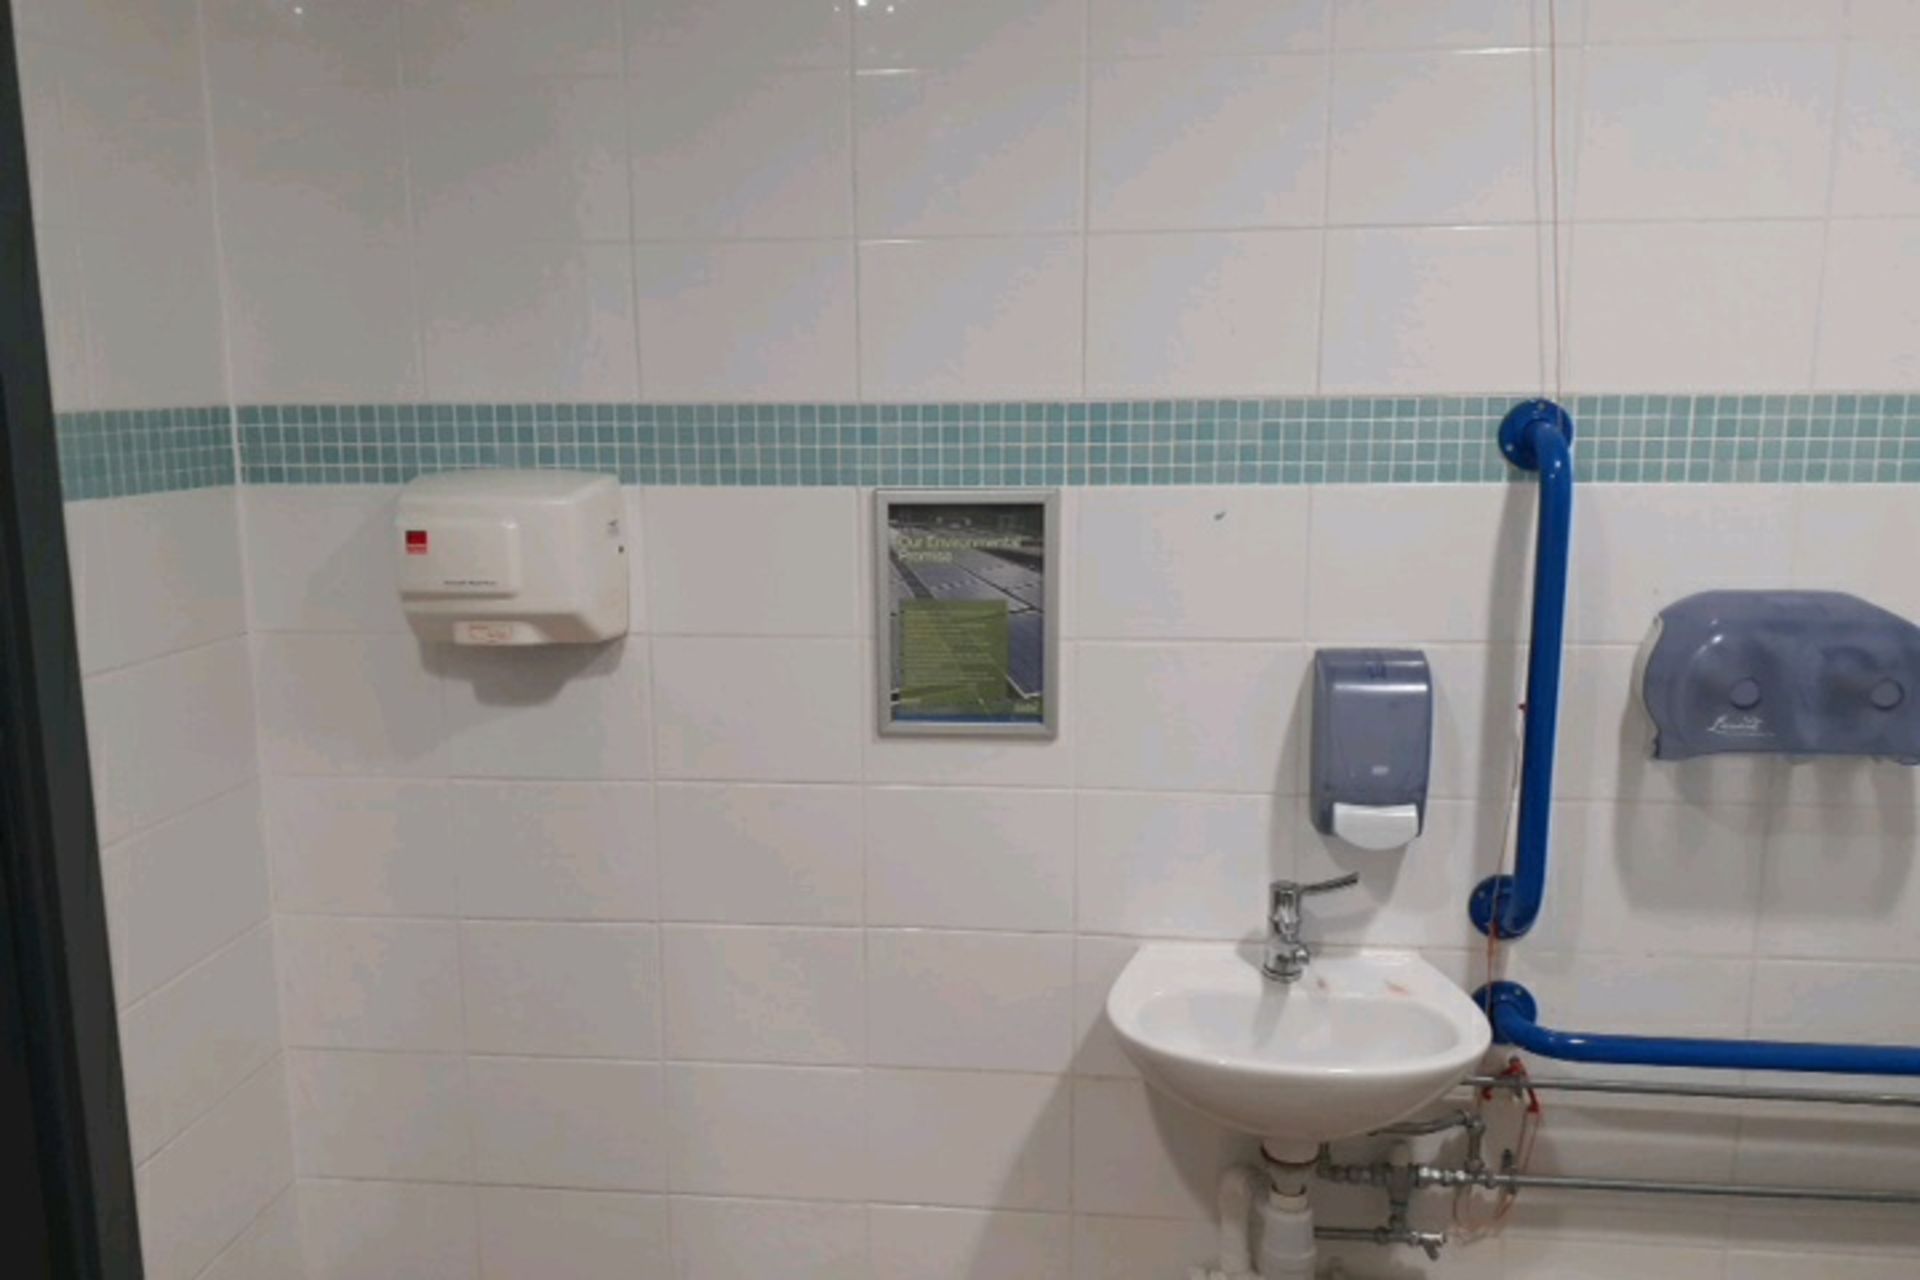 Accessible toilet - Image 4 of 4